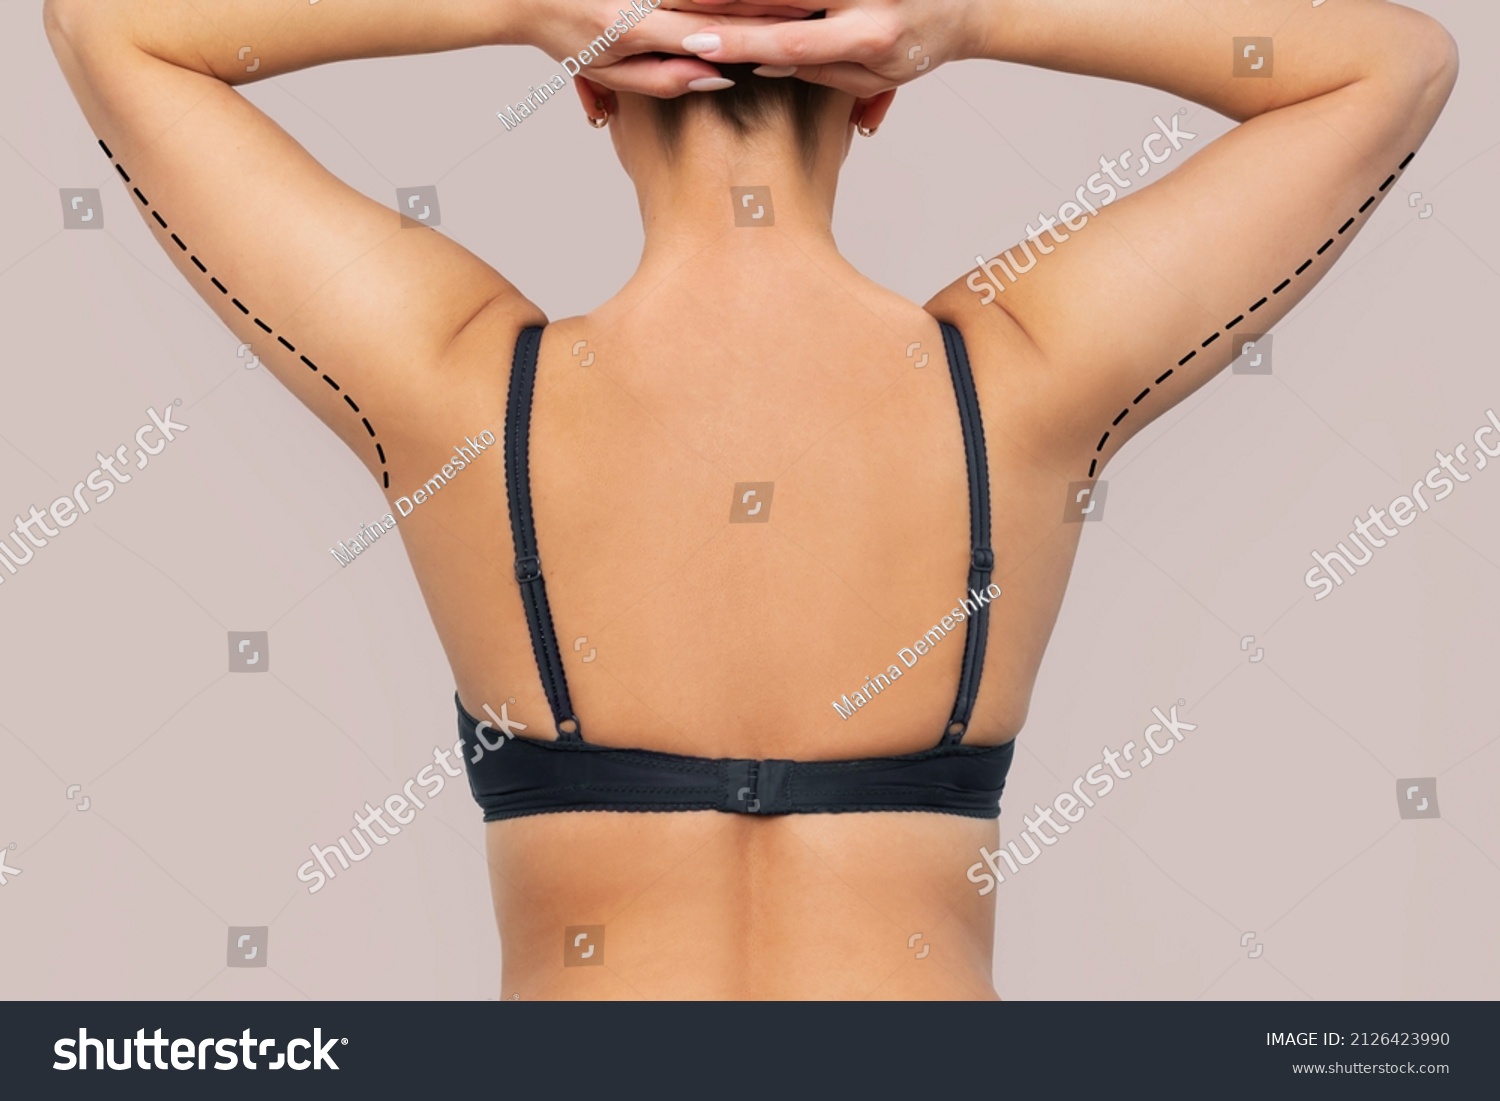 Cropped shot of a young woman with excess fat on her upper arm with marks for liposuction or plastic surgery isolated on a beige background. Loose and saggy muscles. Overweight. Beauty surgery concep #2126423990